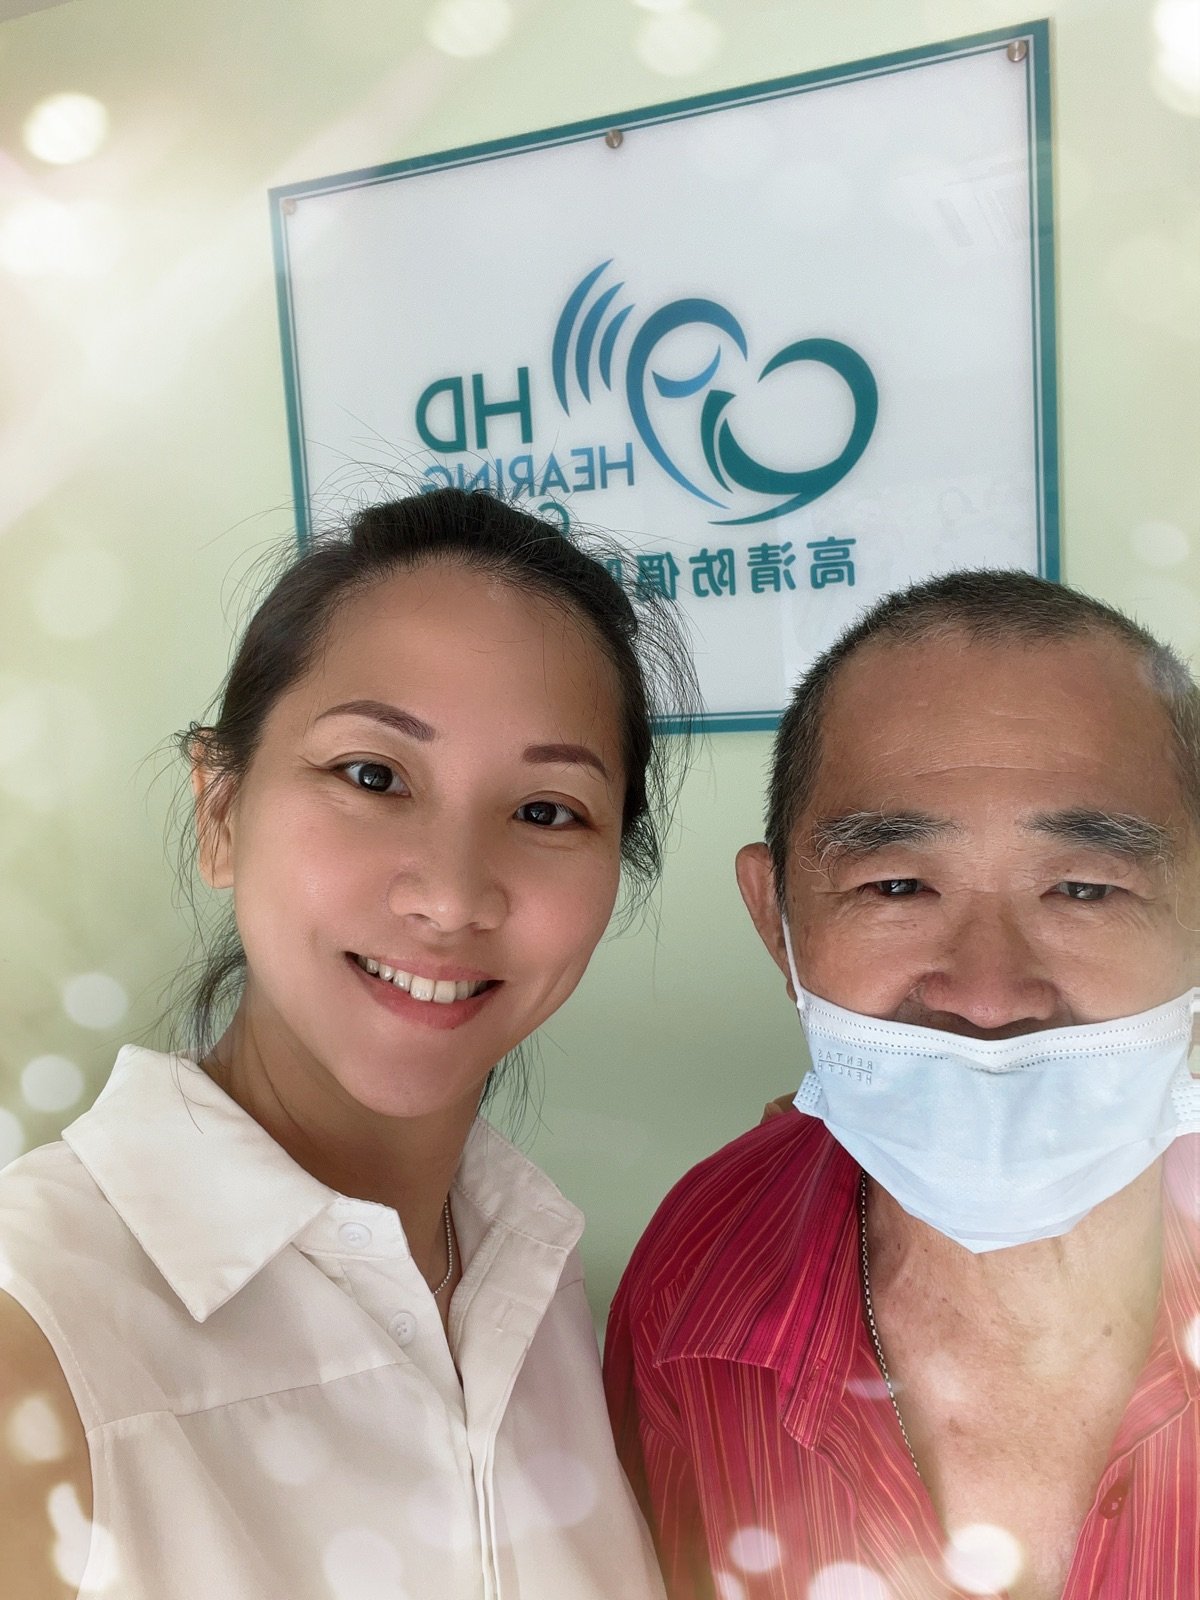 Techonolgy changed life  & HD HEARING CARE CENTRE SDN BHD